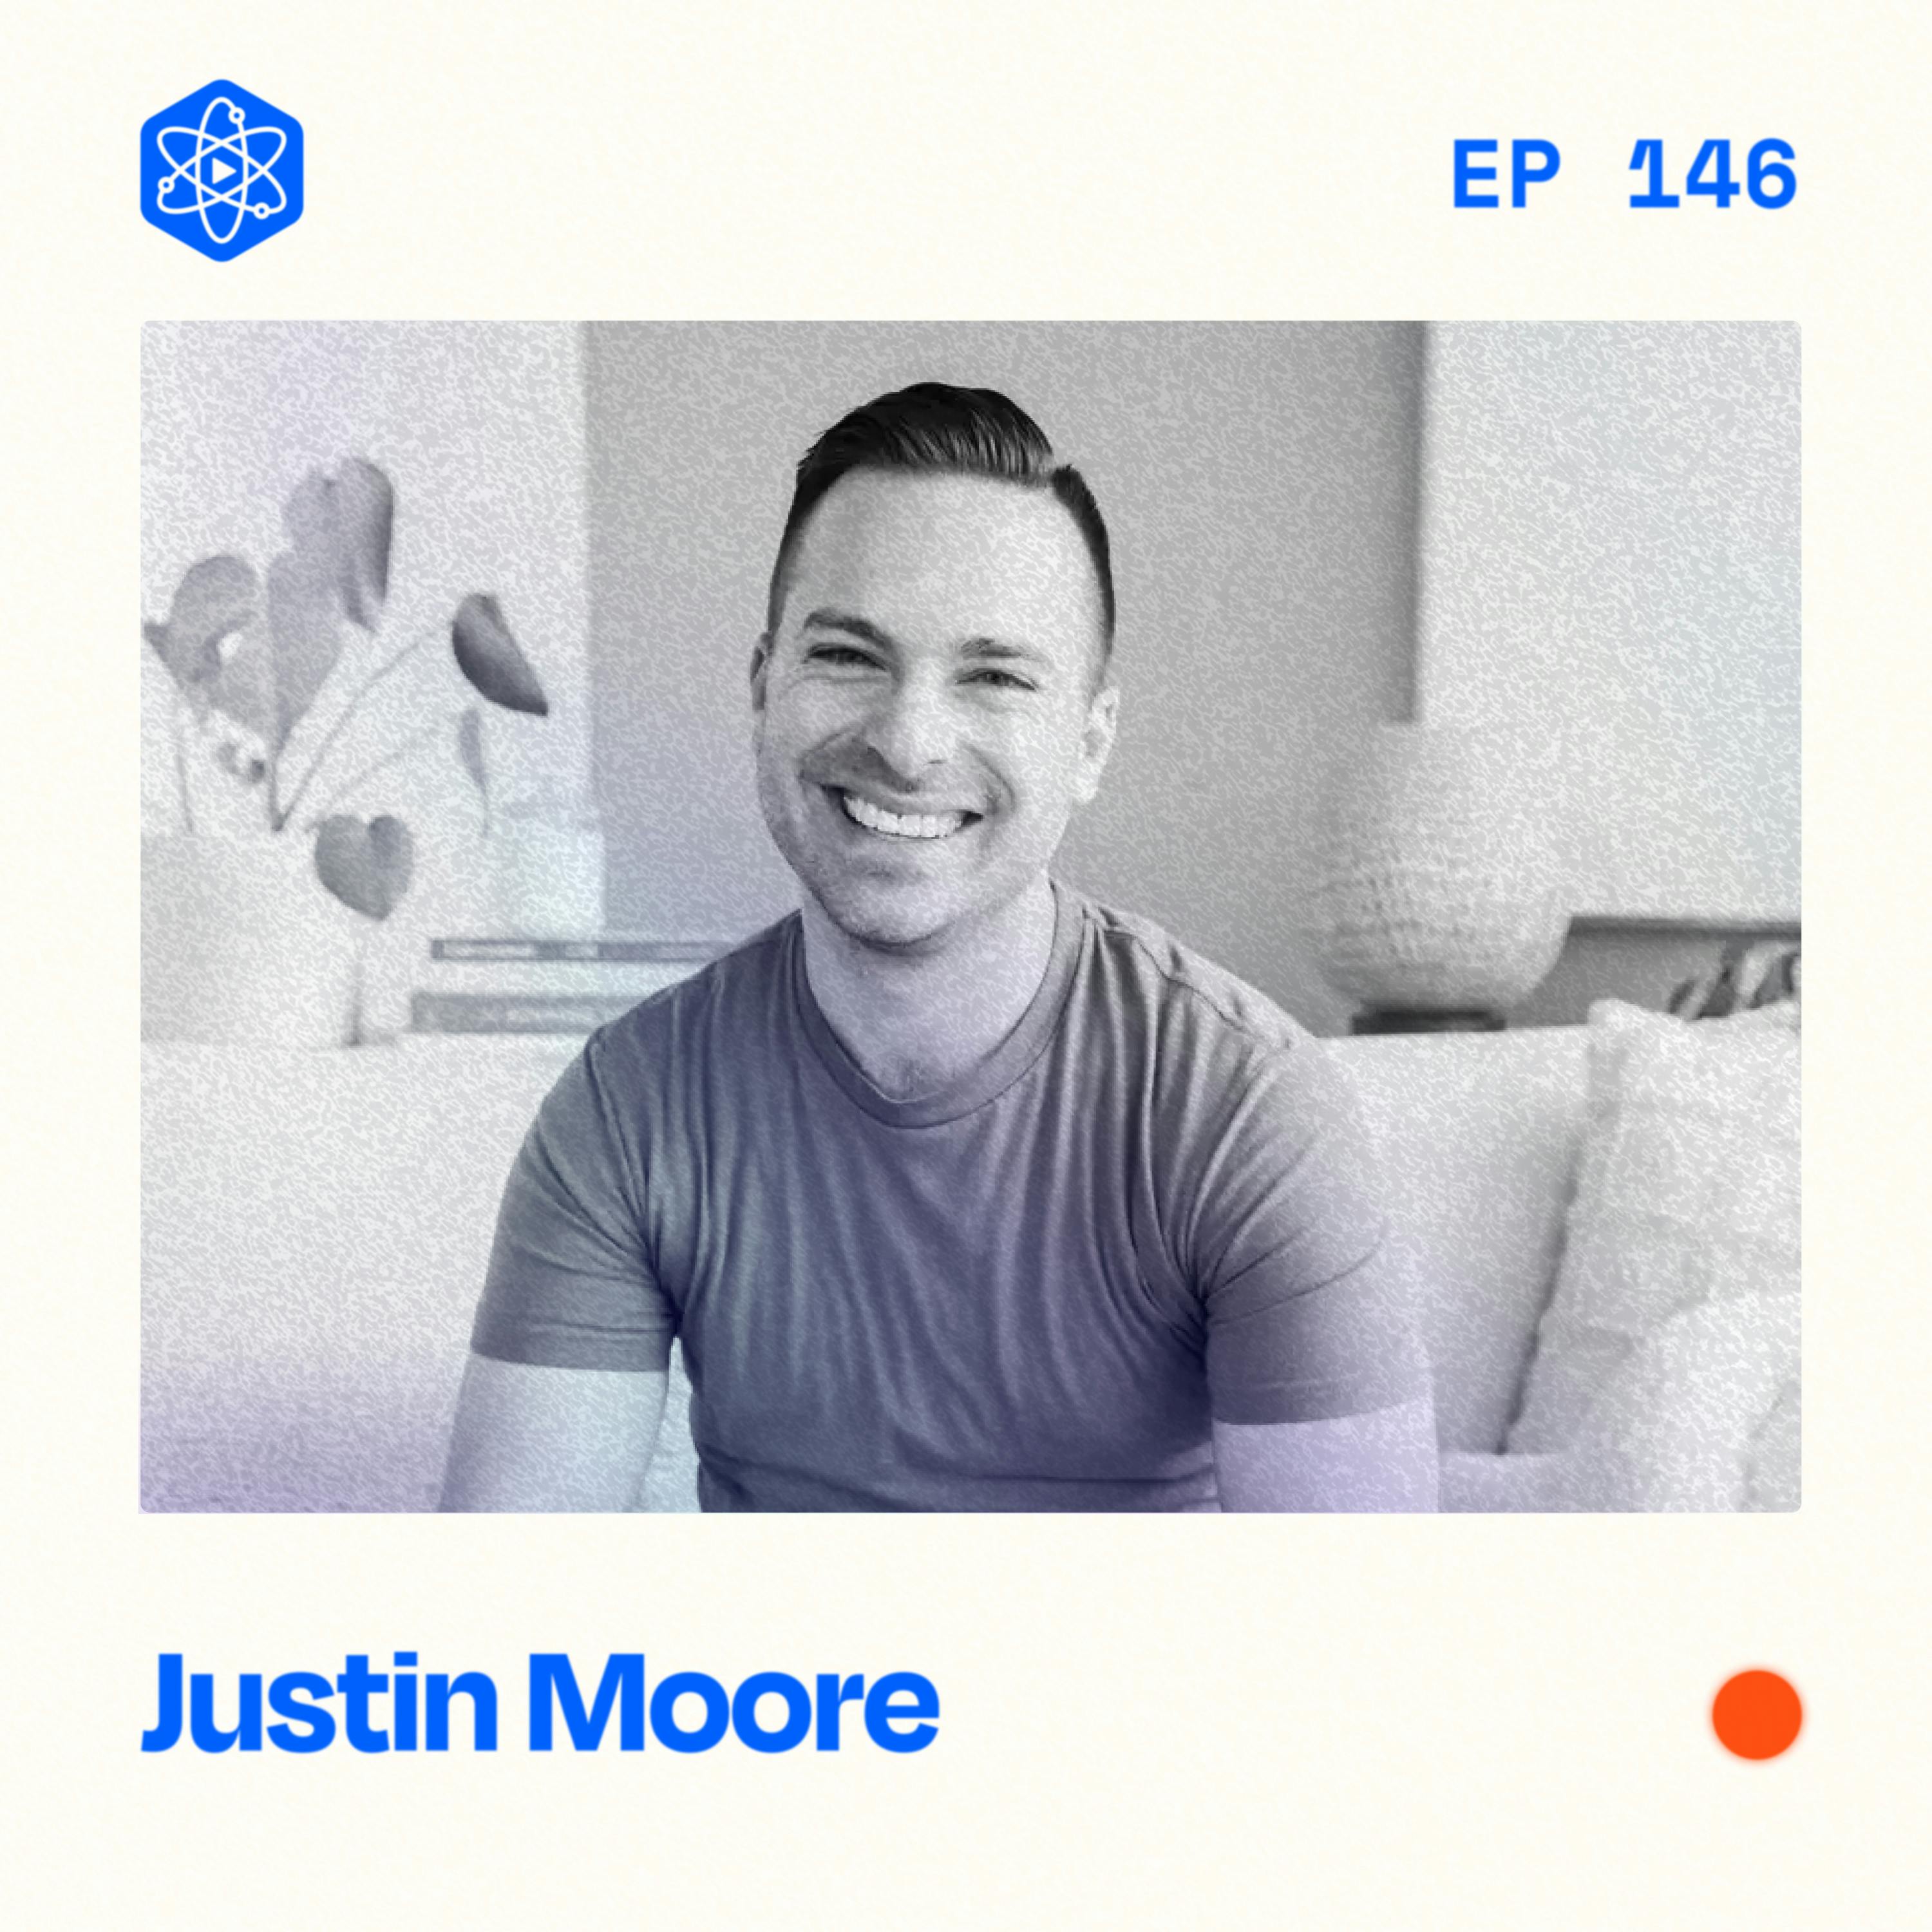 Justin Moore – Redesigning his perfect offer ladder